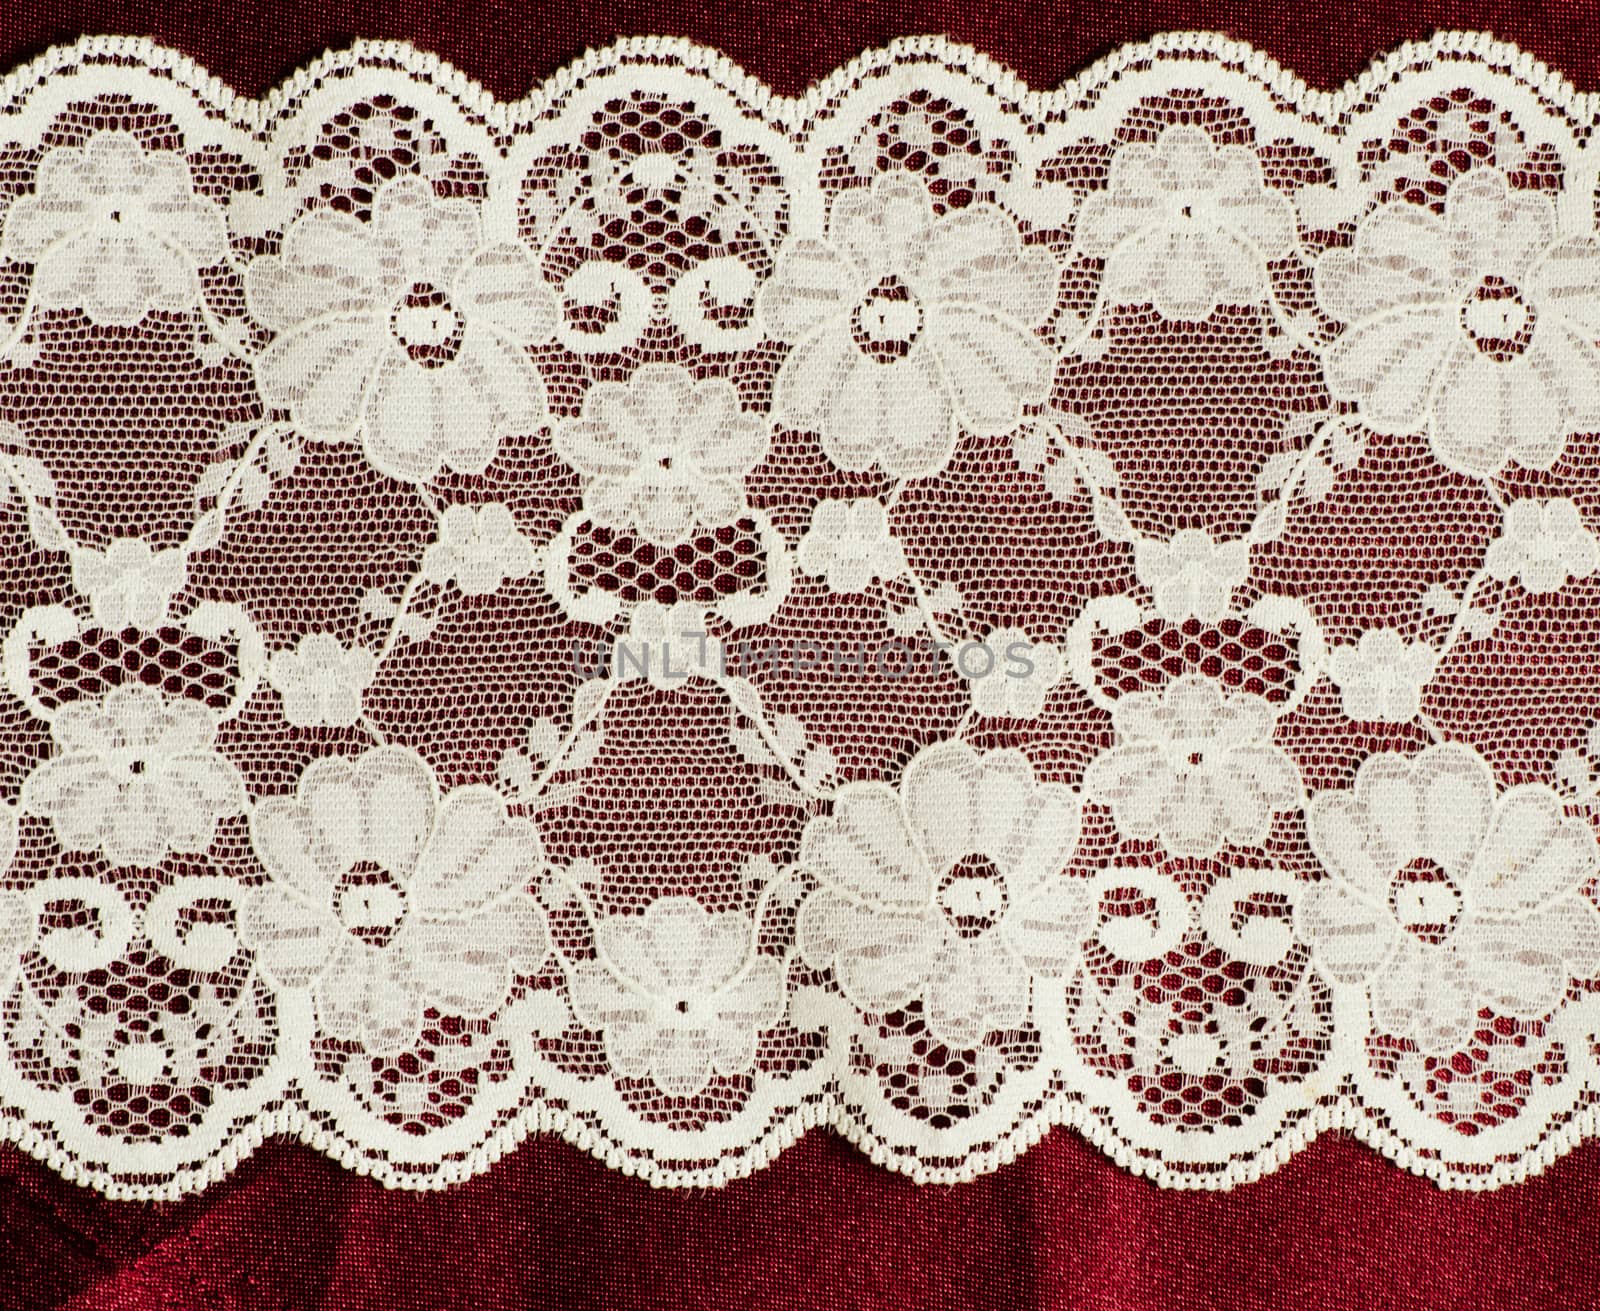 lace on the red satin fabric by sarkao